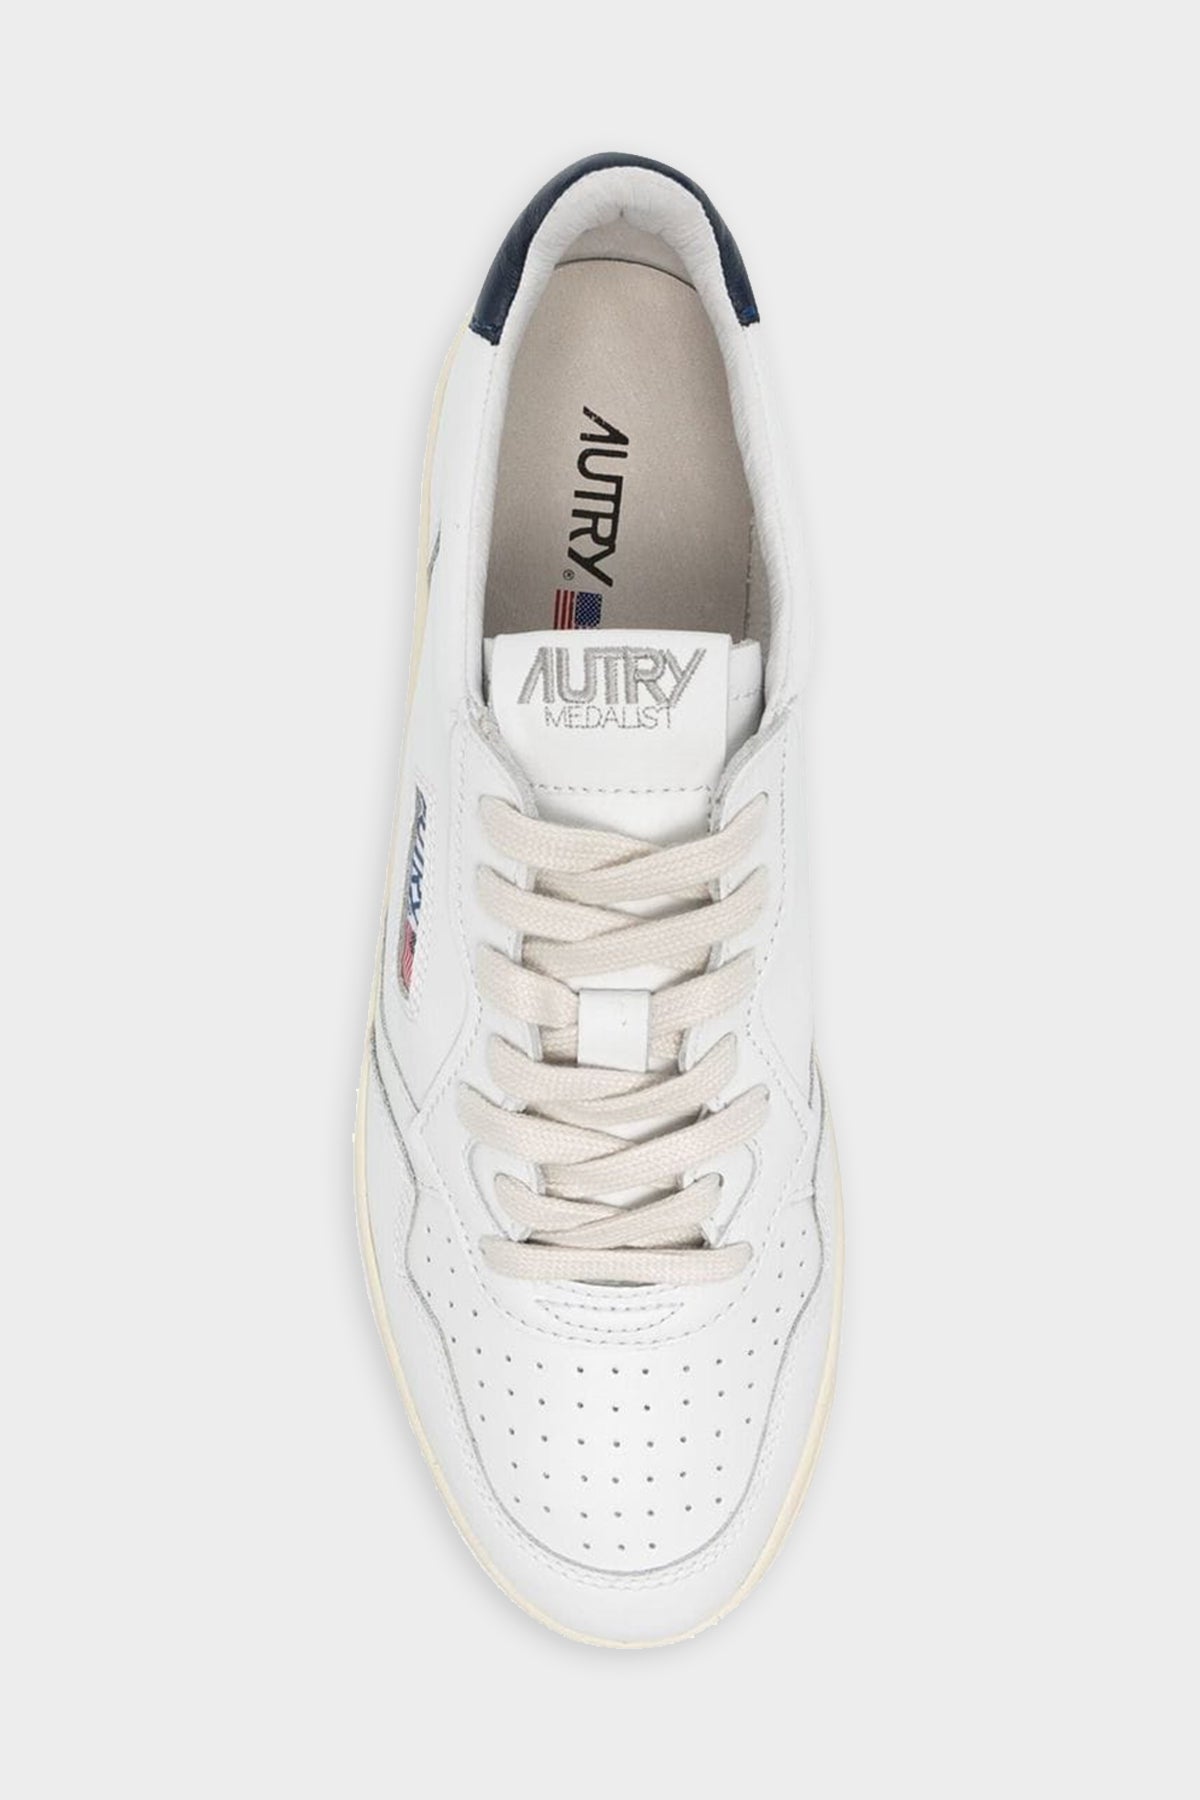 Medalist Low Leather Men Sneaker in White Space - shop-olivia.com